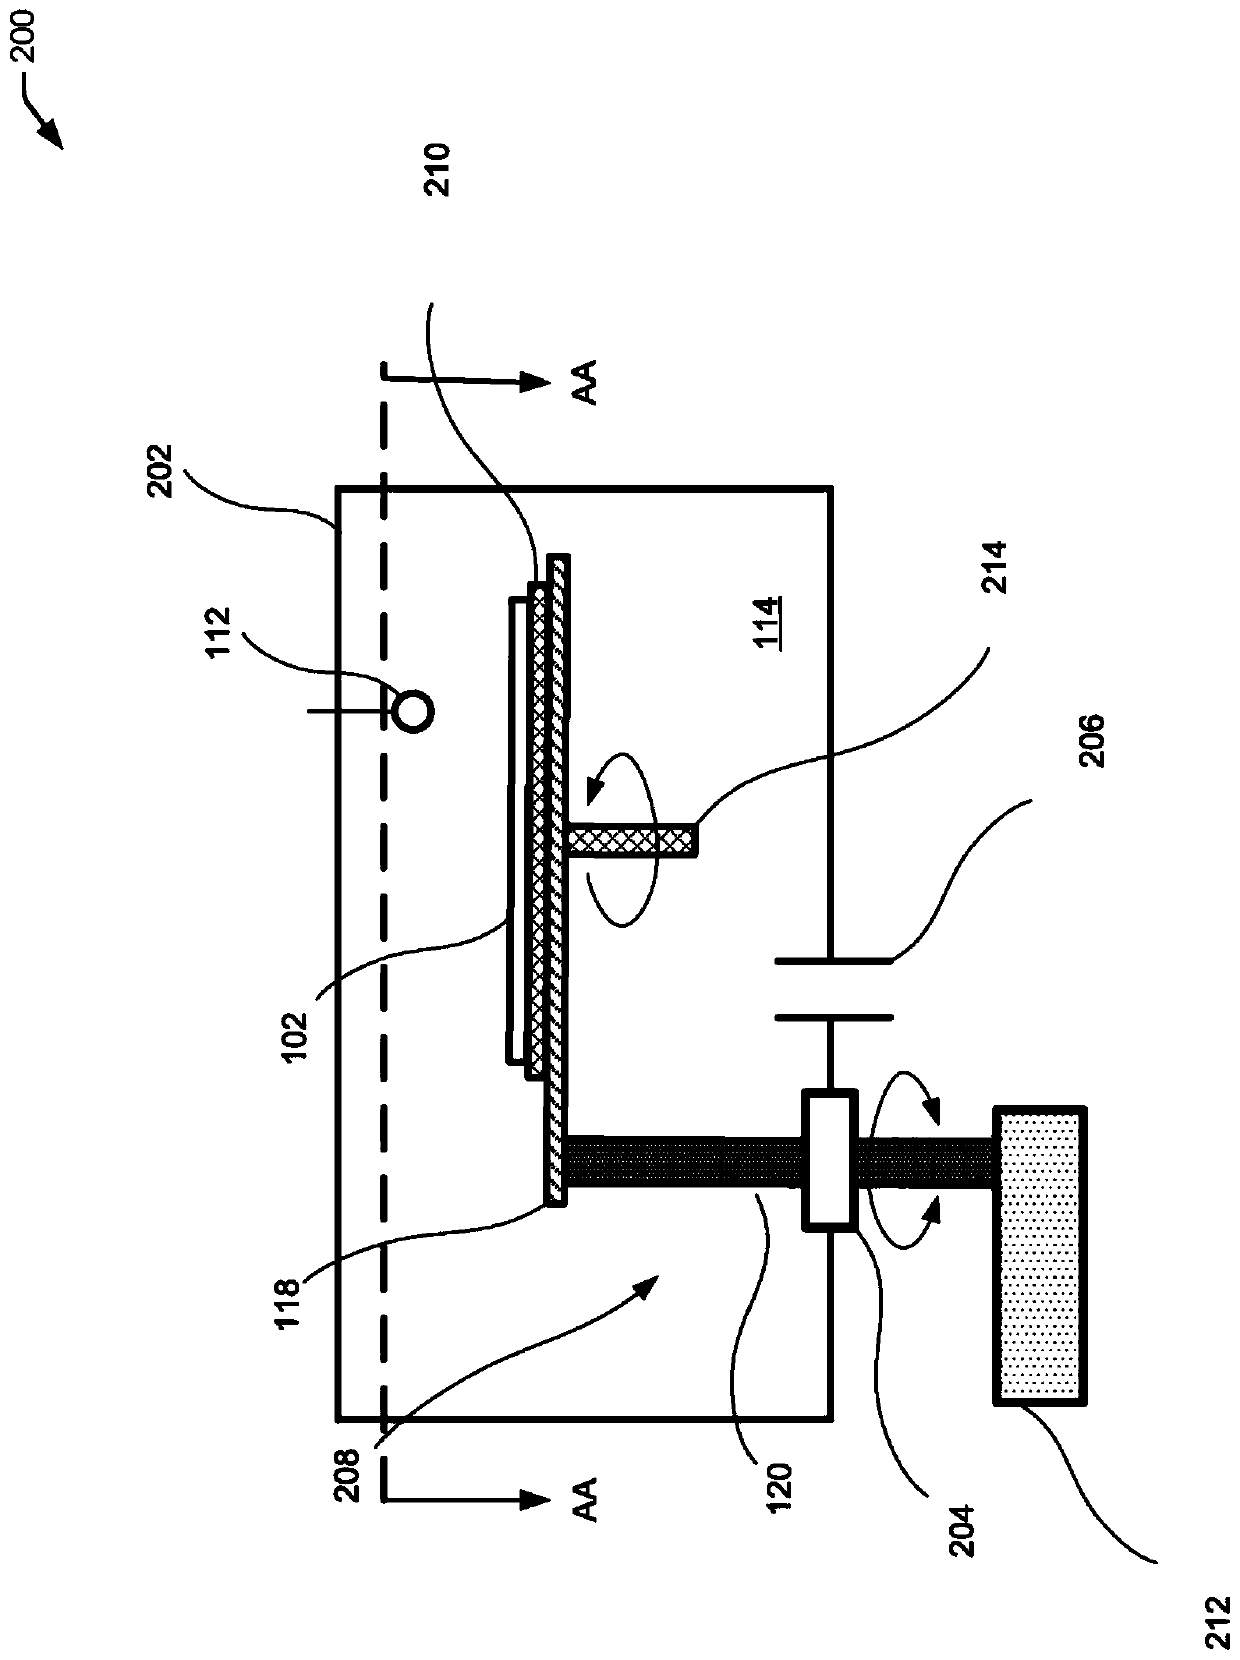 Systems and methods for rotating and translating a substrate in a process chamber